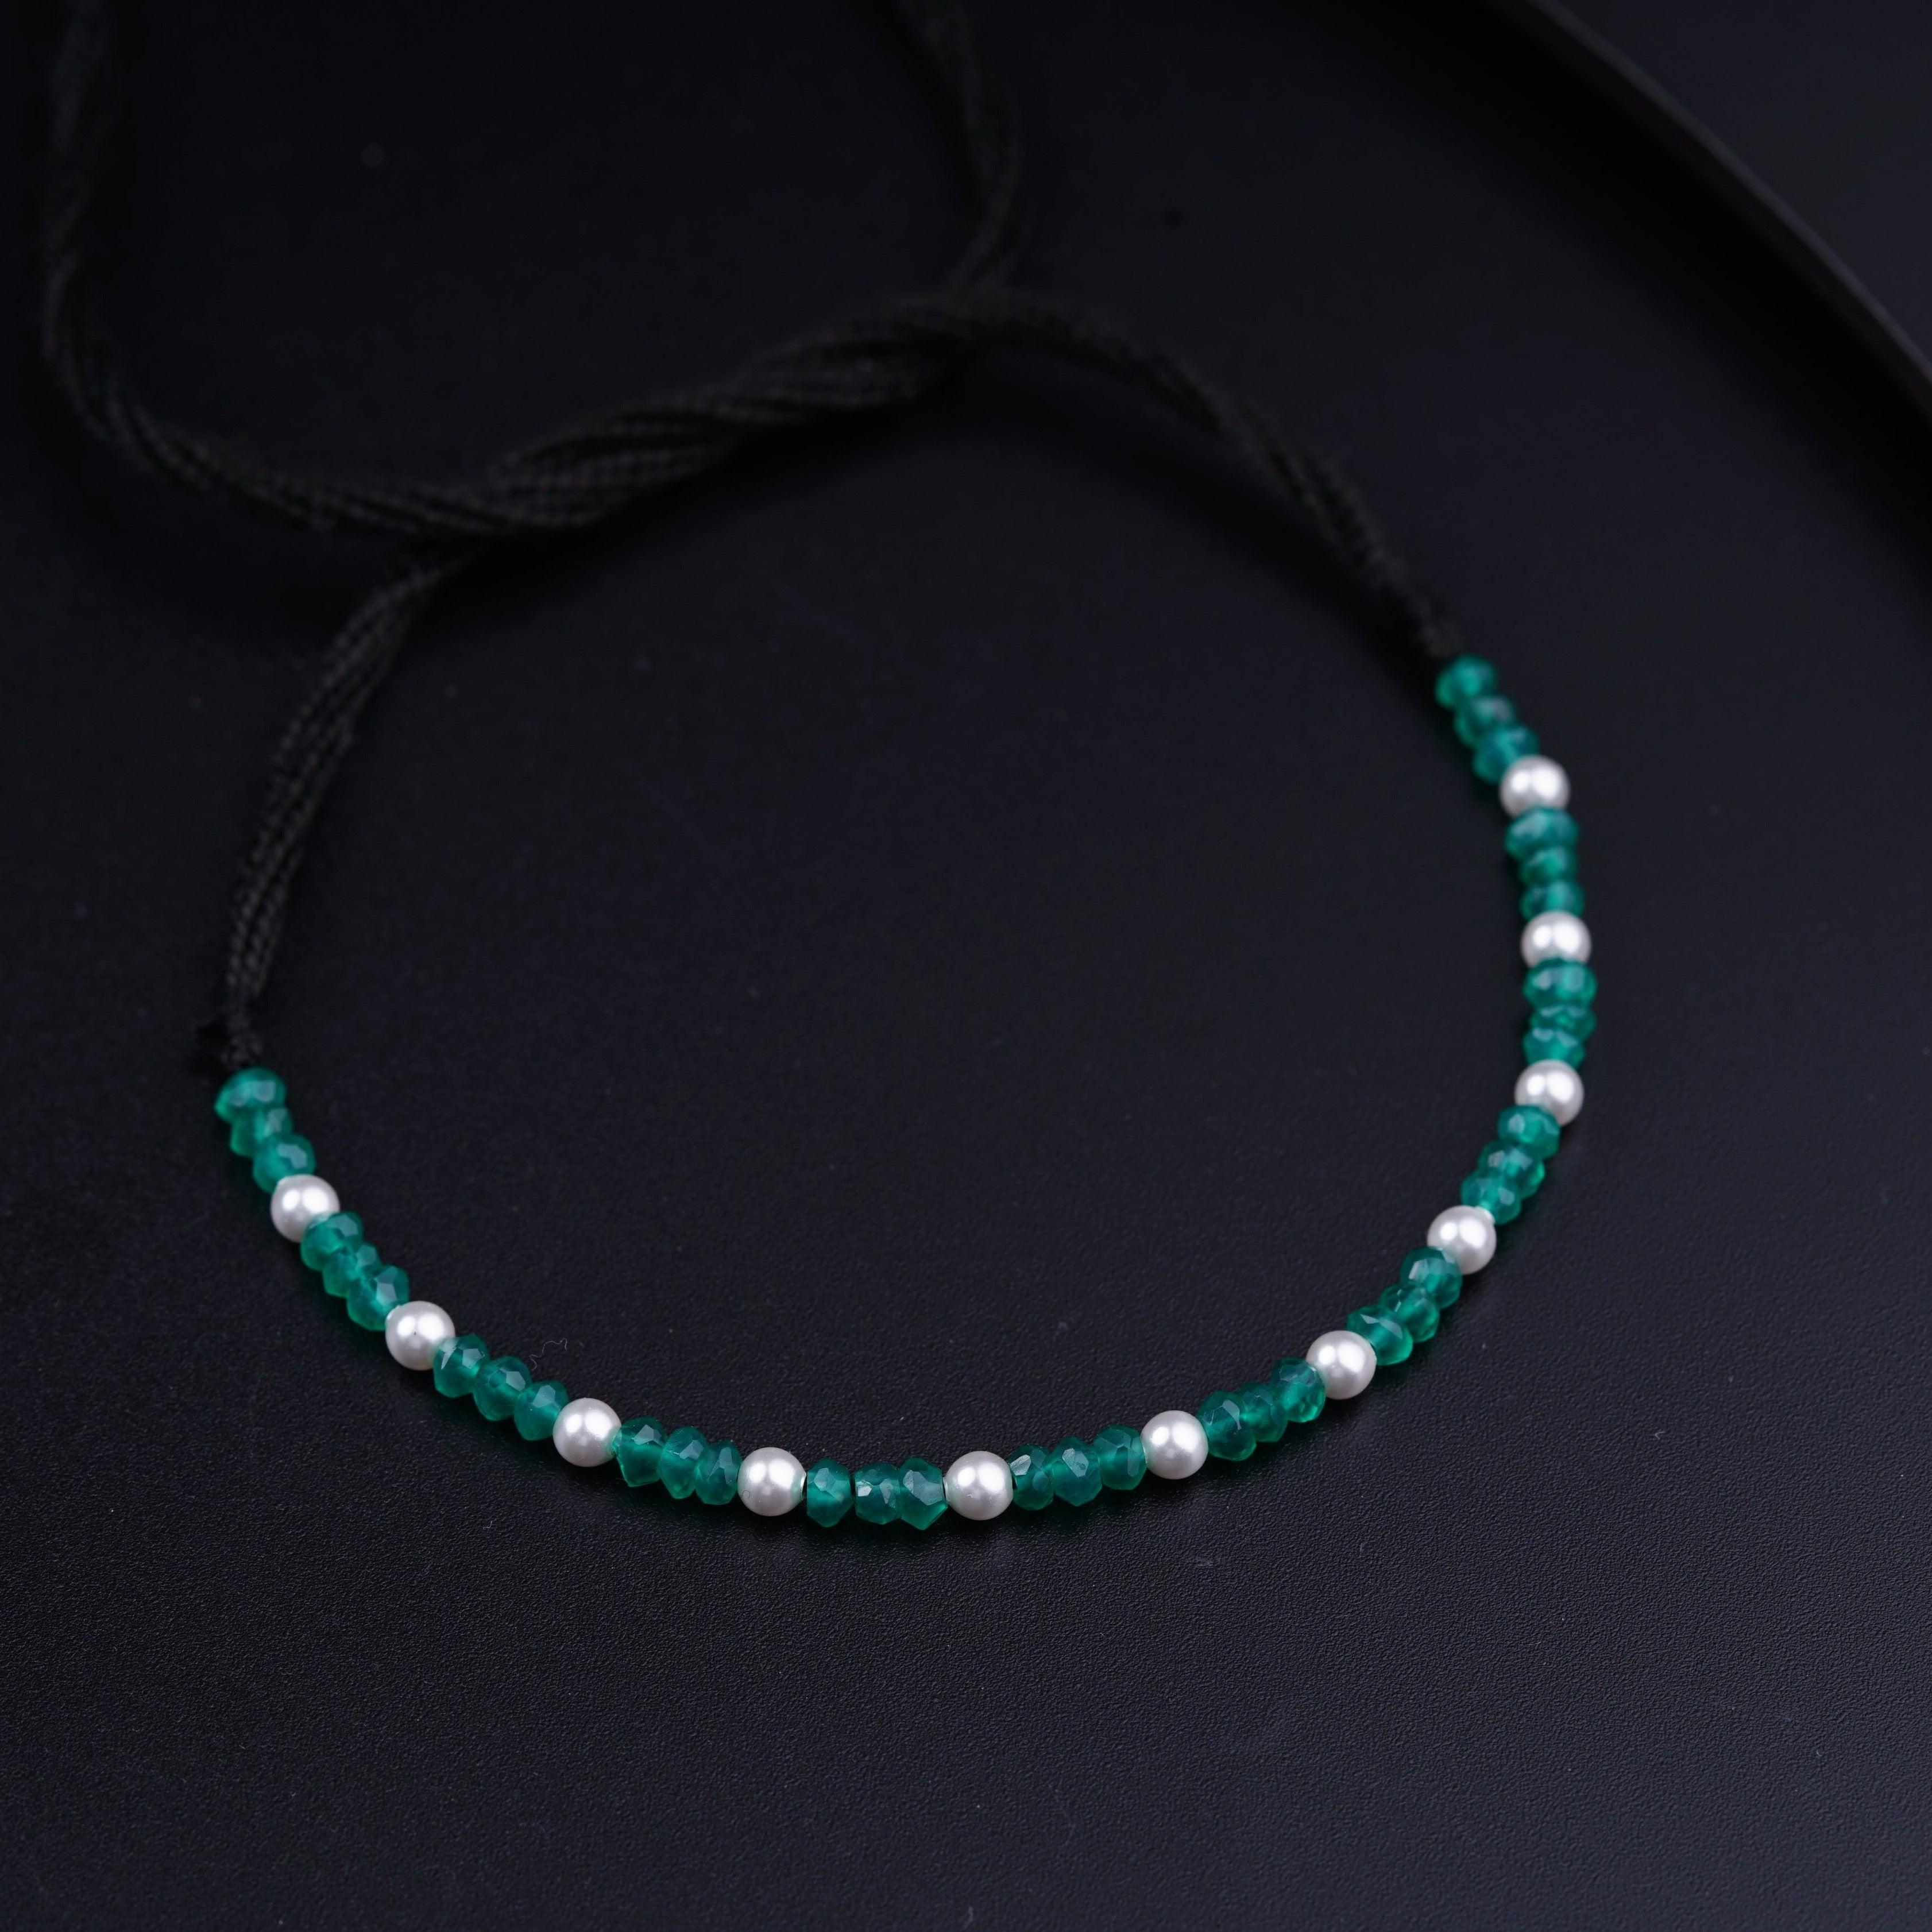 a green beaded bracelet with white pearls